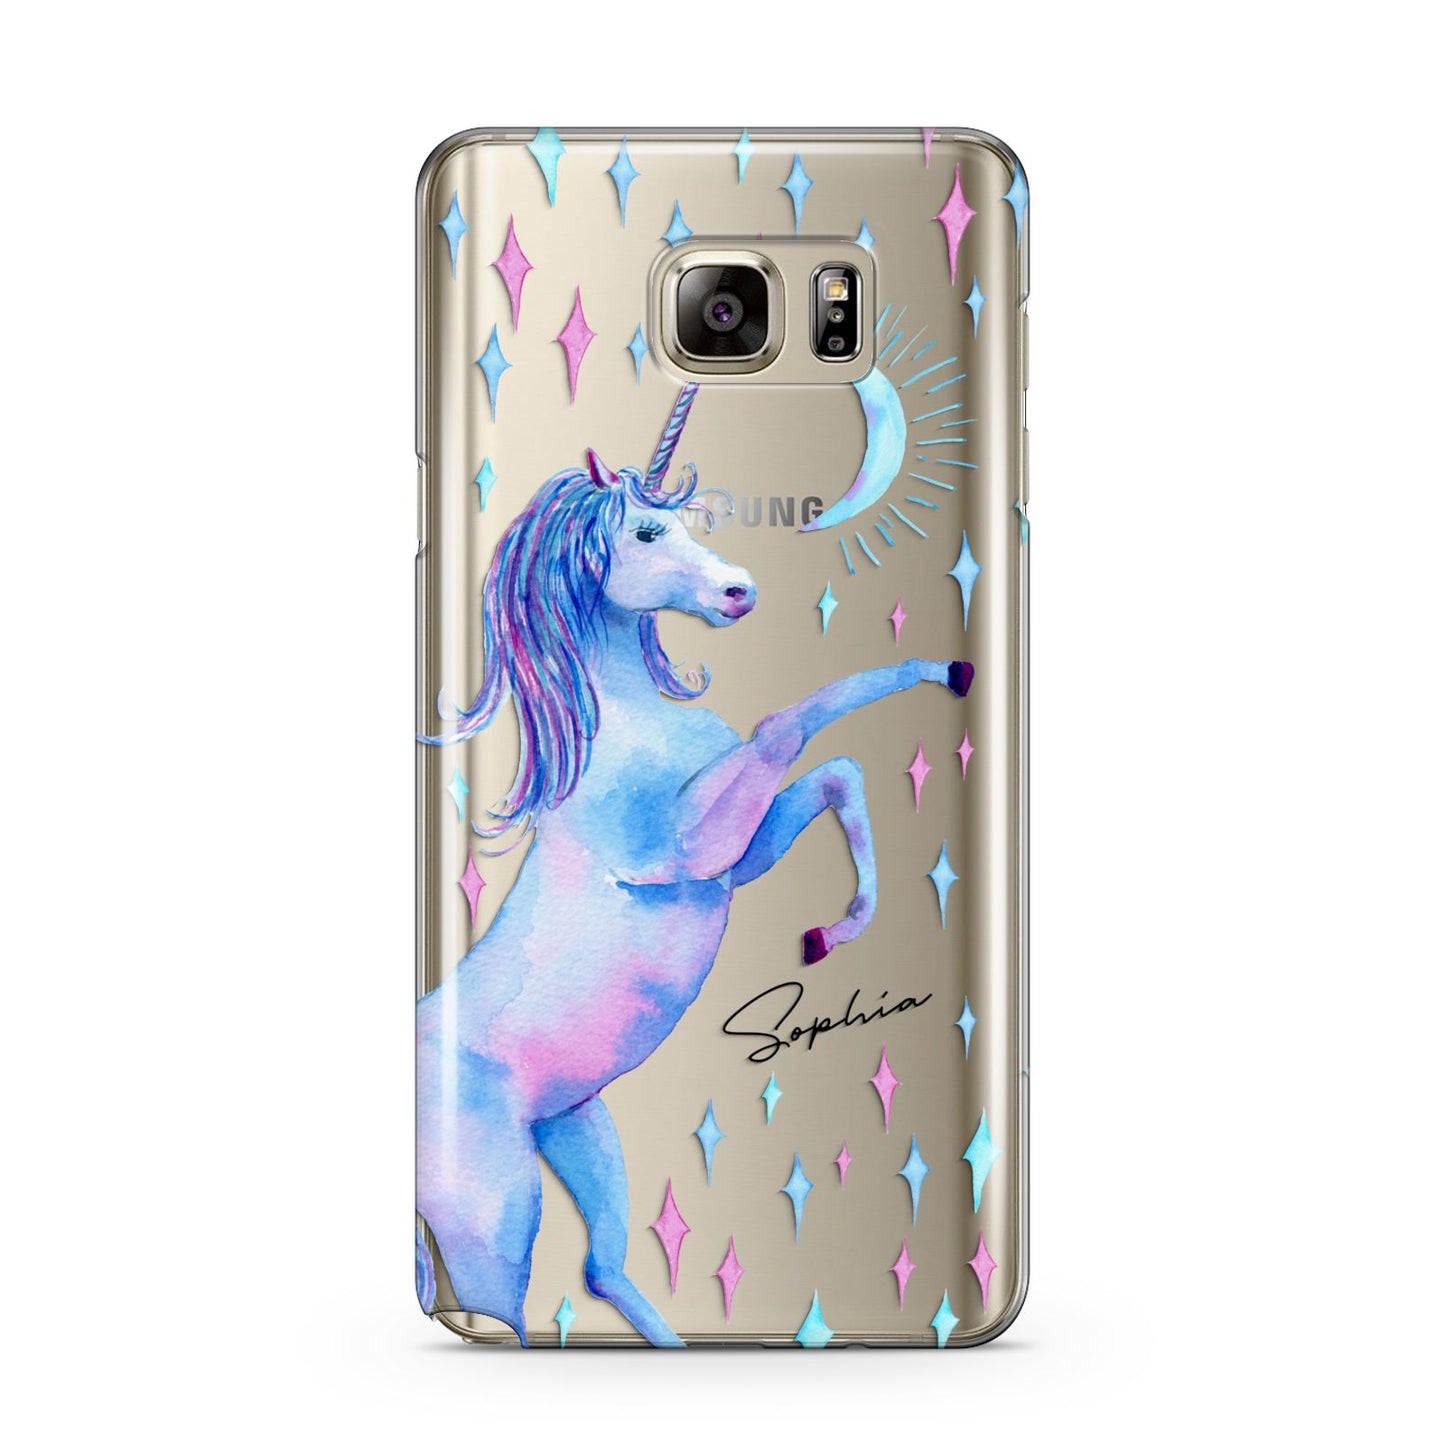 Personalised Unicorn Name Samsung Galaxy Note 5 Case